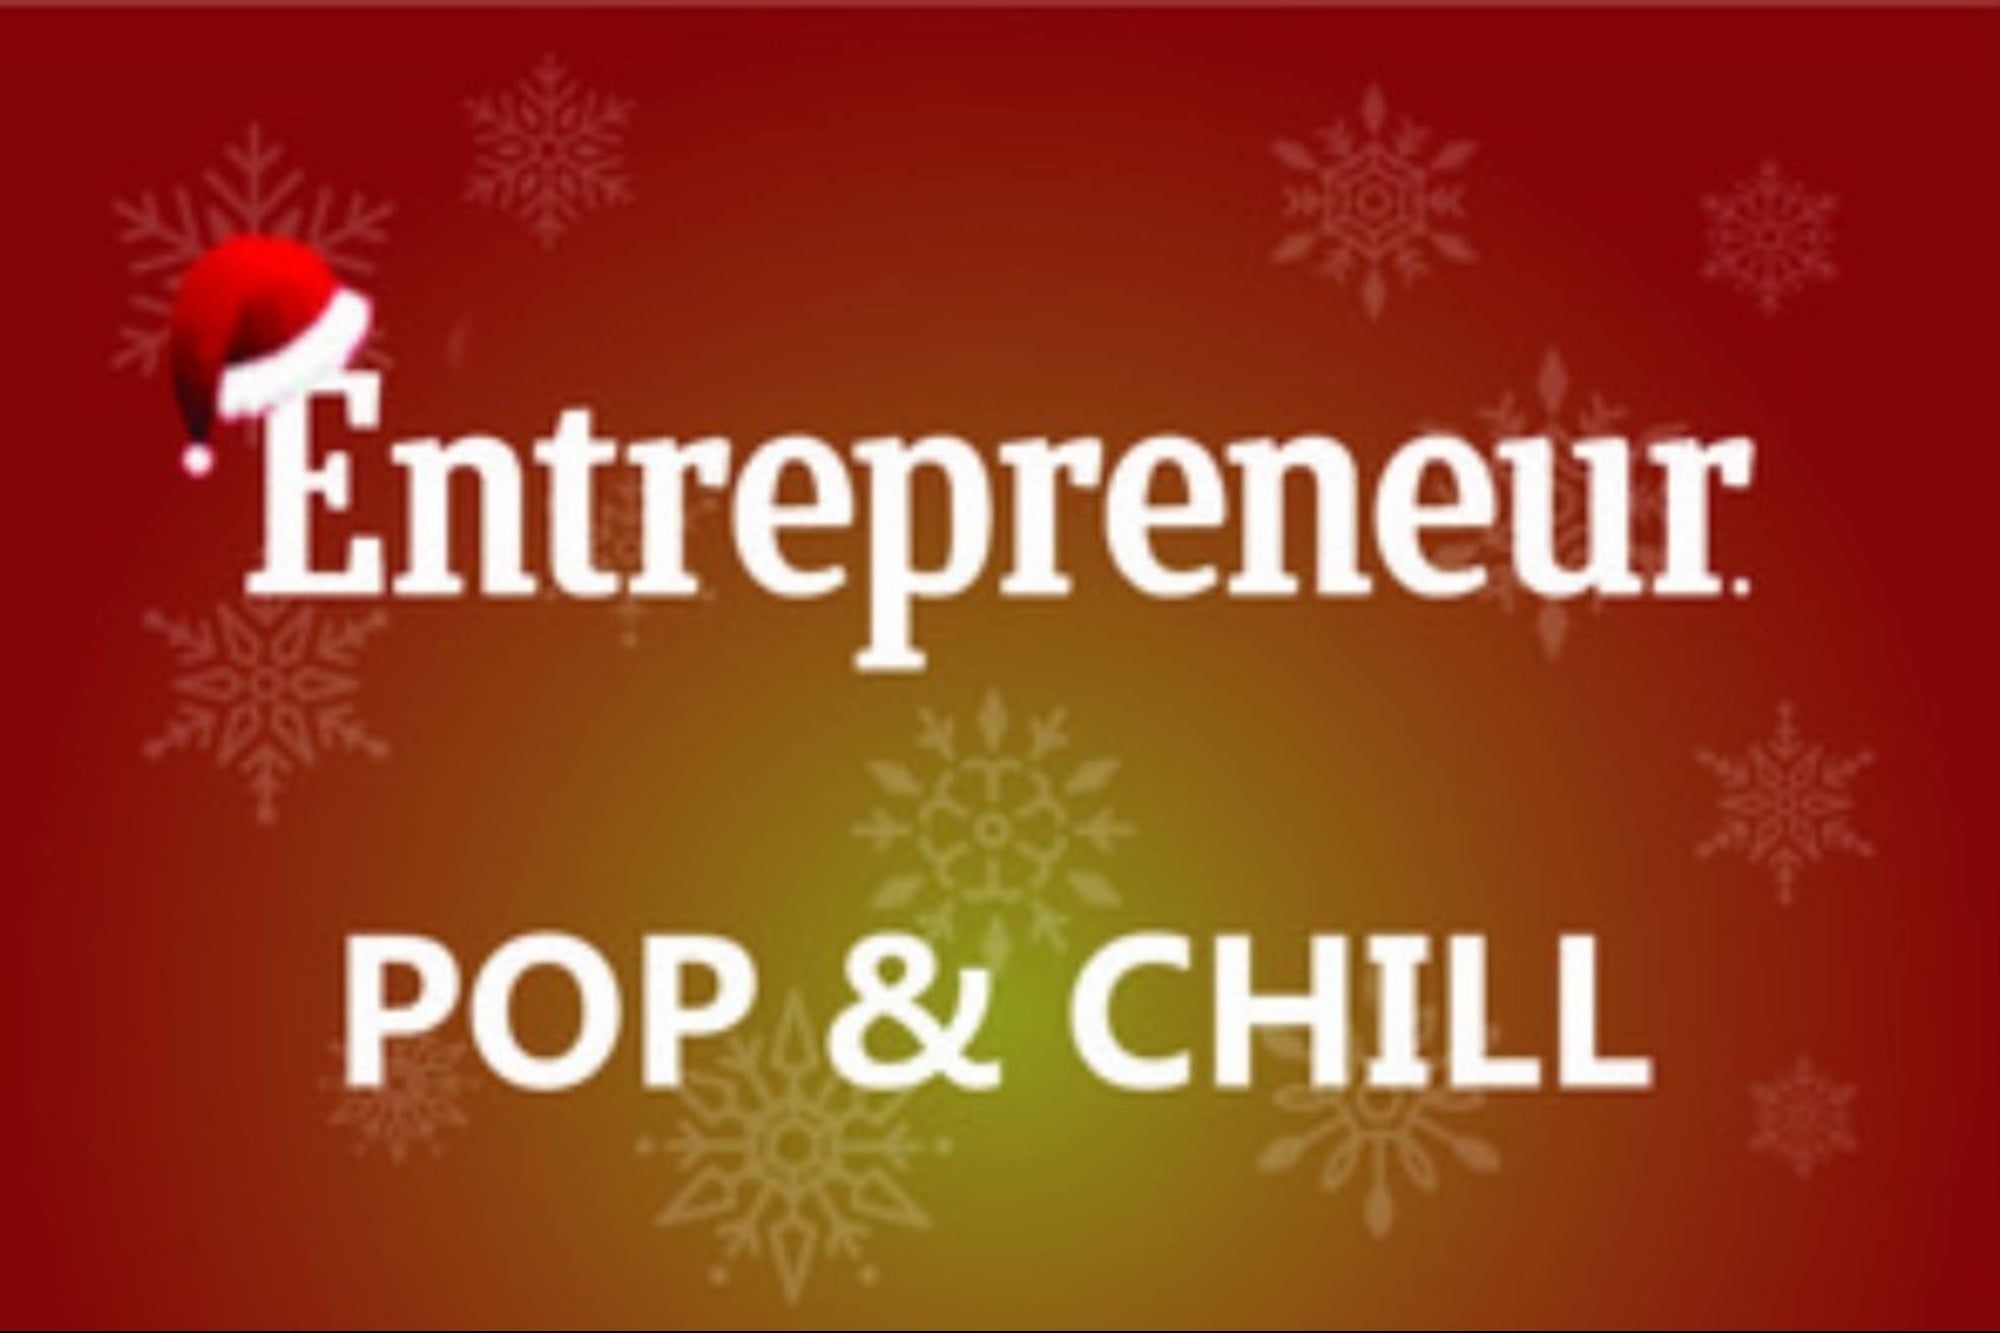 Get active with a Christmas playlist created especially for you, an entrepreneur!